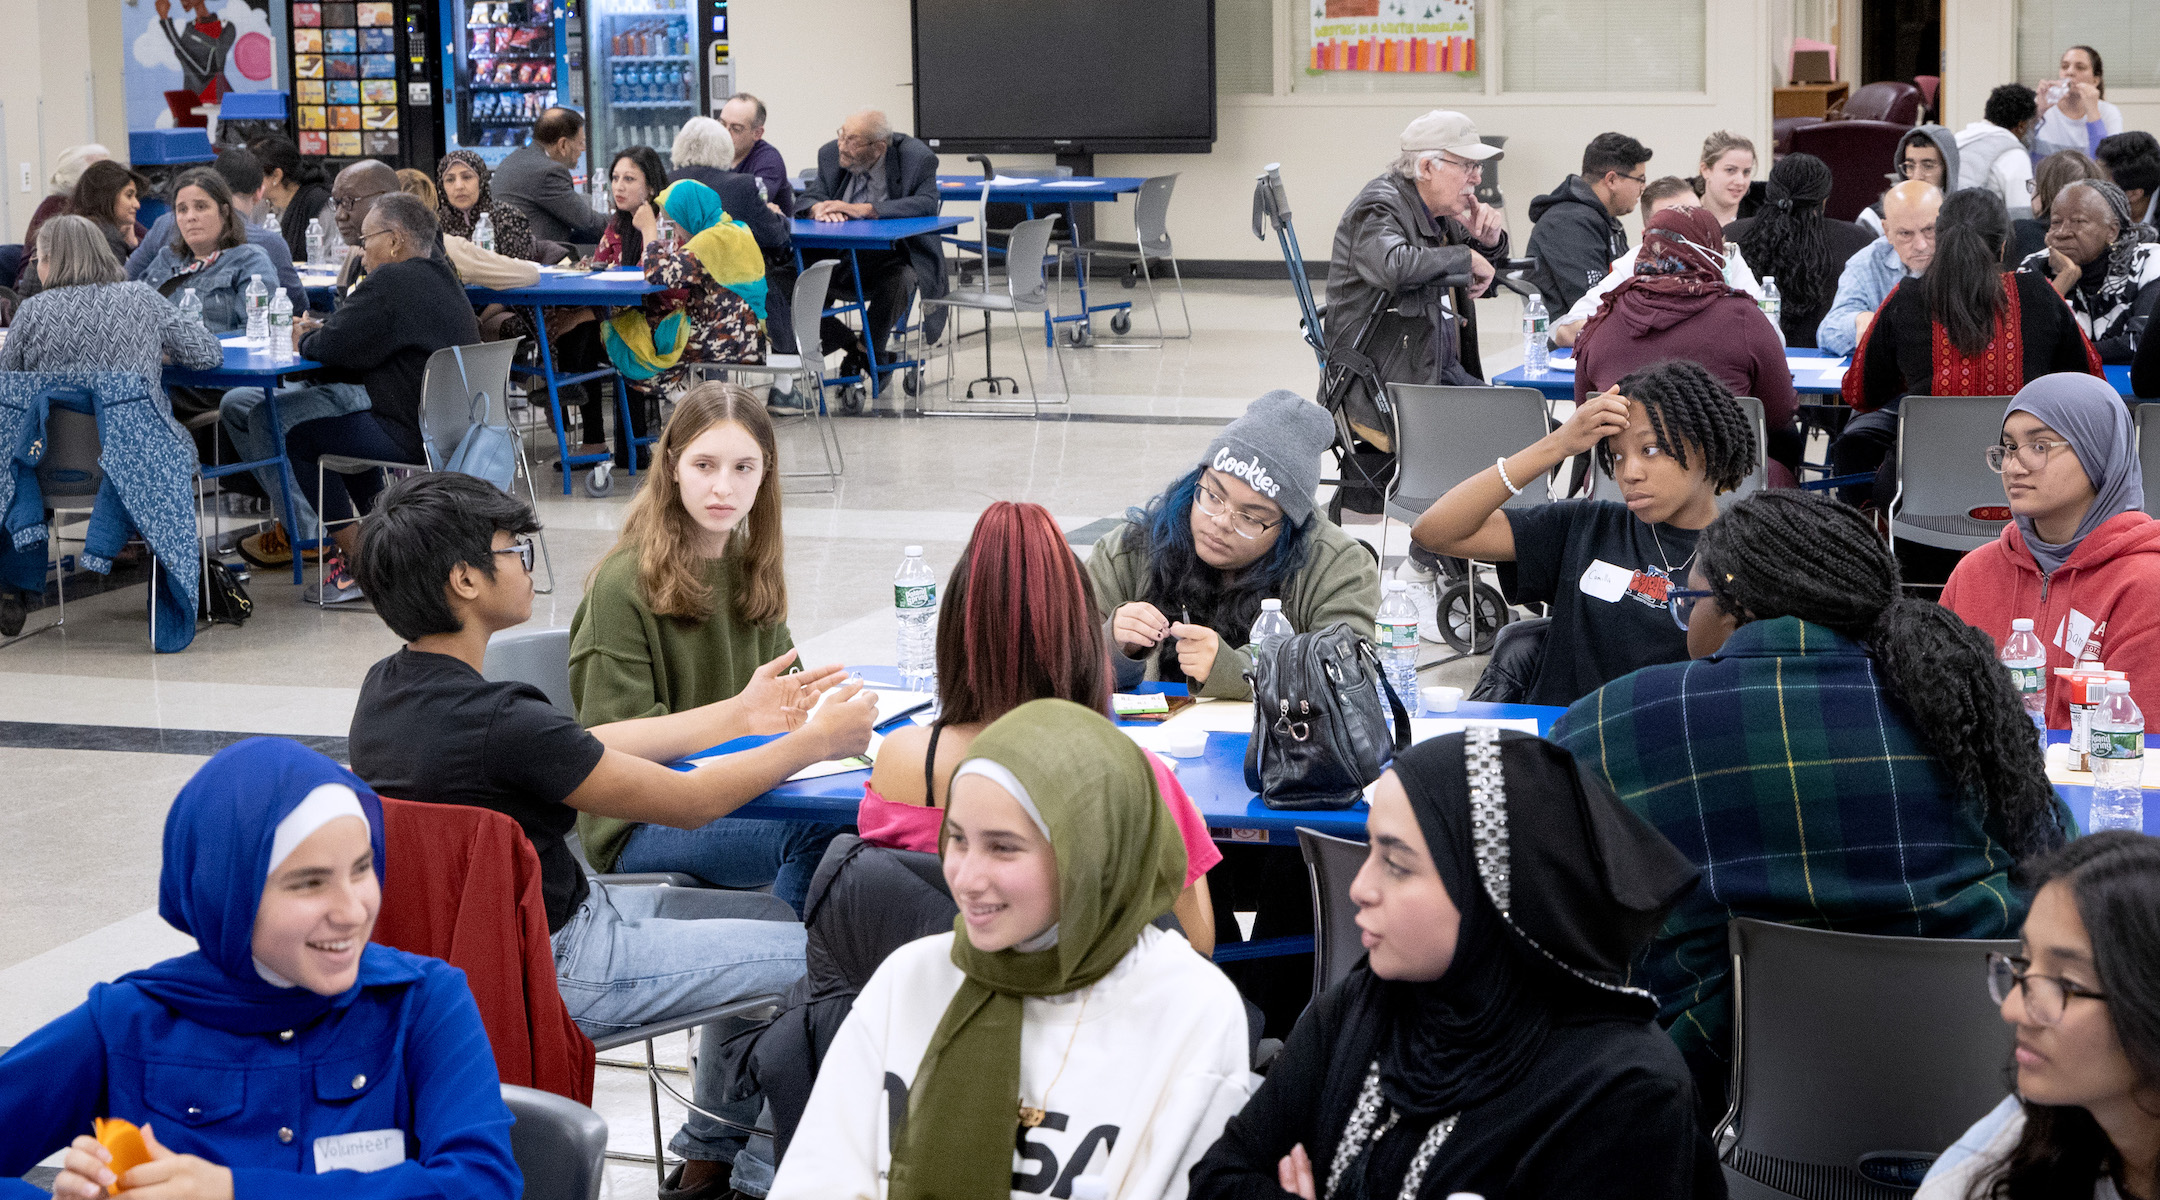 A youth-led, interfaith dialogue is held at Teaneck High School to discuss the Middle East, Teaneck, New Jersey, Nov. 5, 2023. (Aristide Economopoulos for The Washington Post via Getty Images)